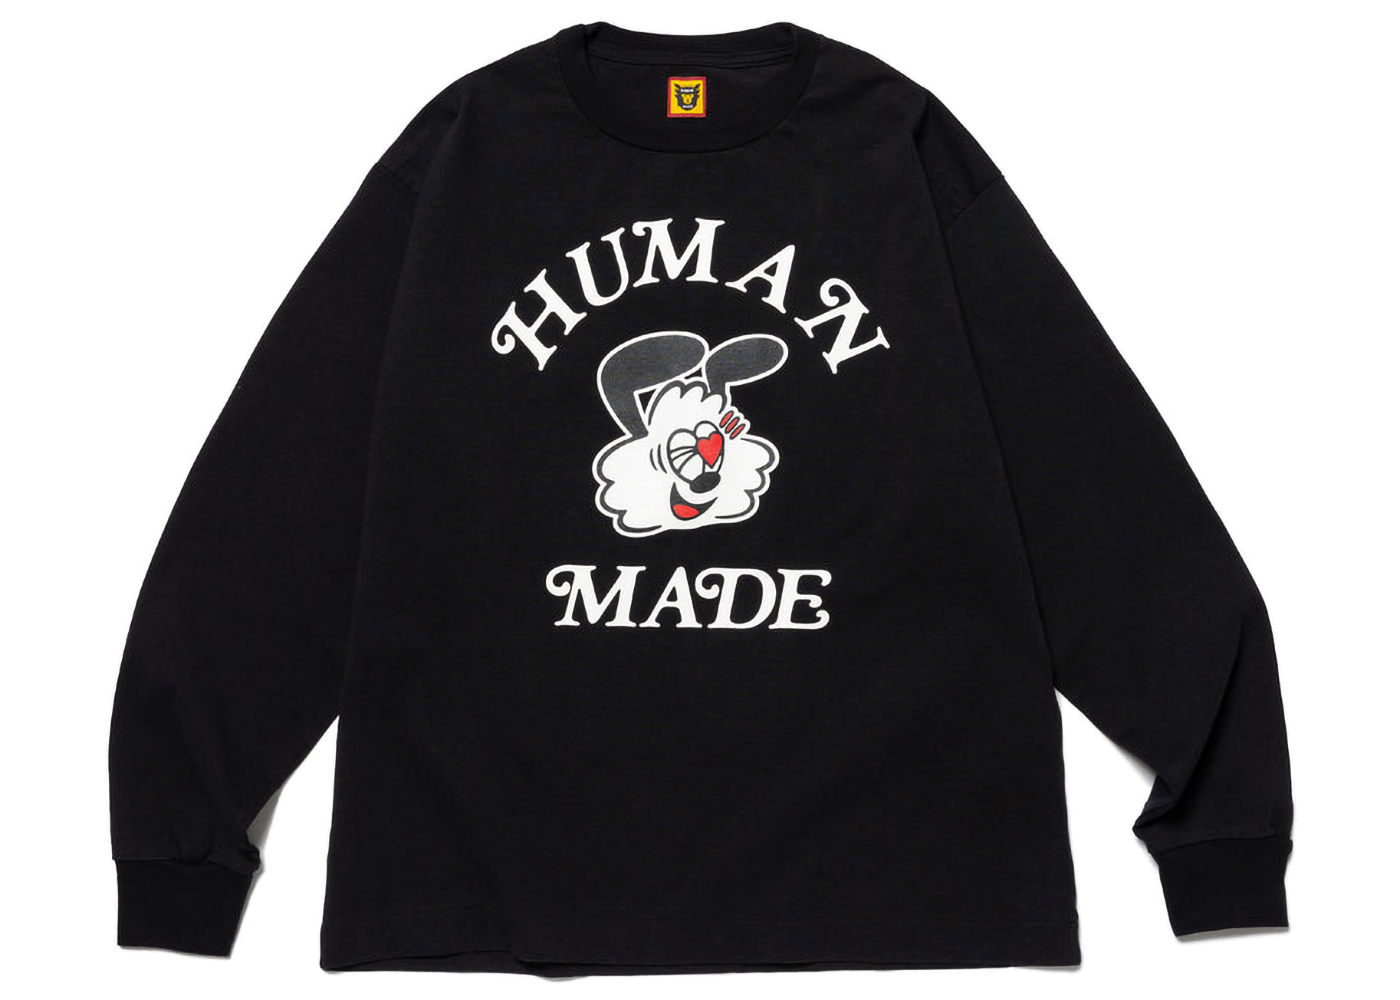 Human Made x Girls Don't Cry GDC White Day L/S T-Shirt Black